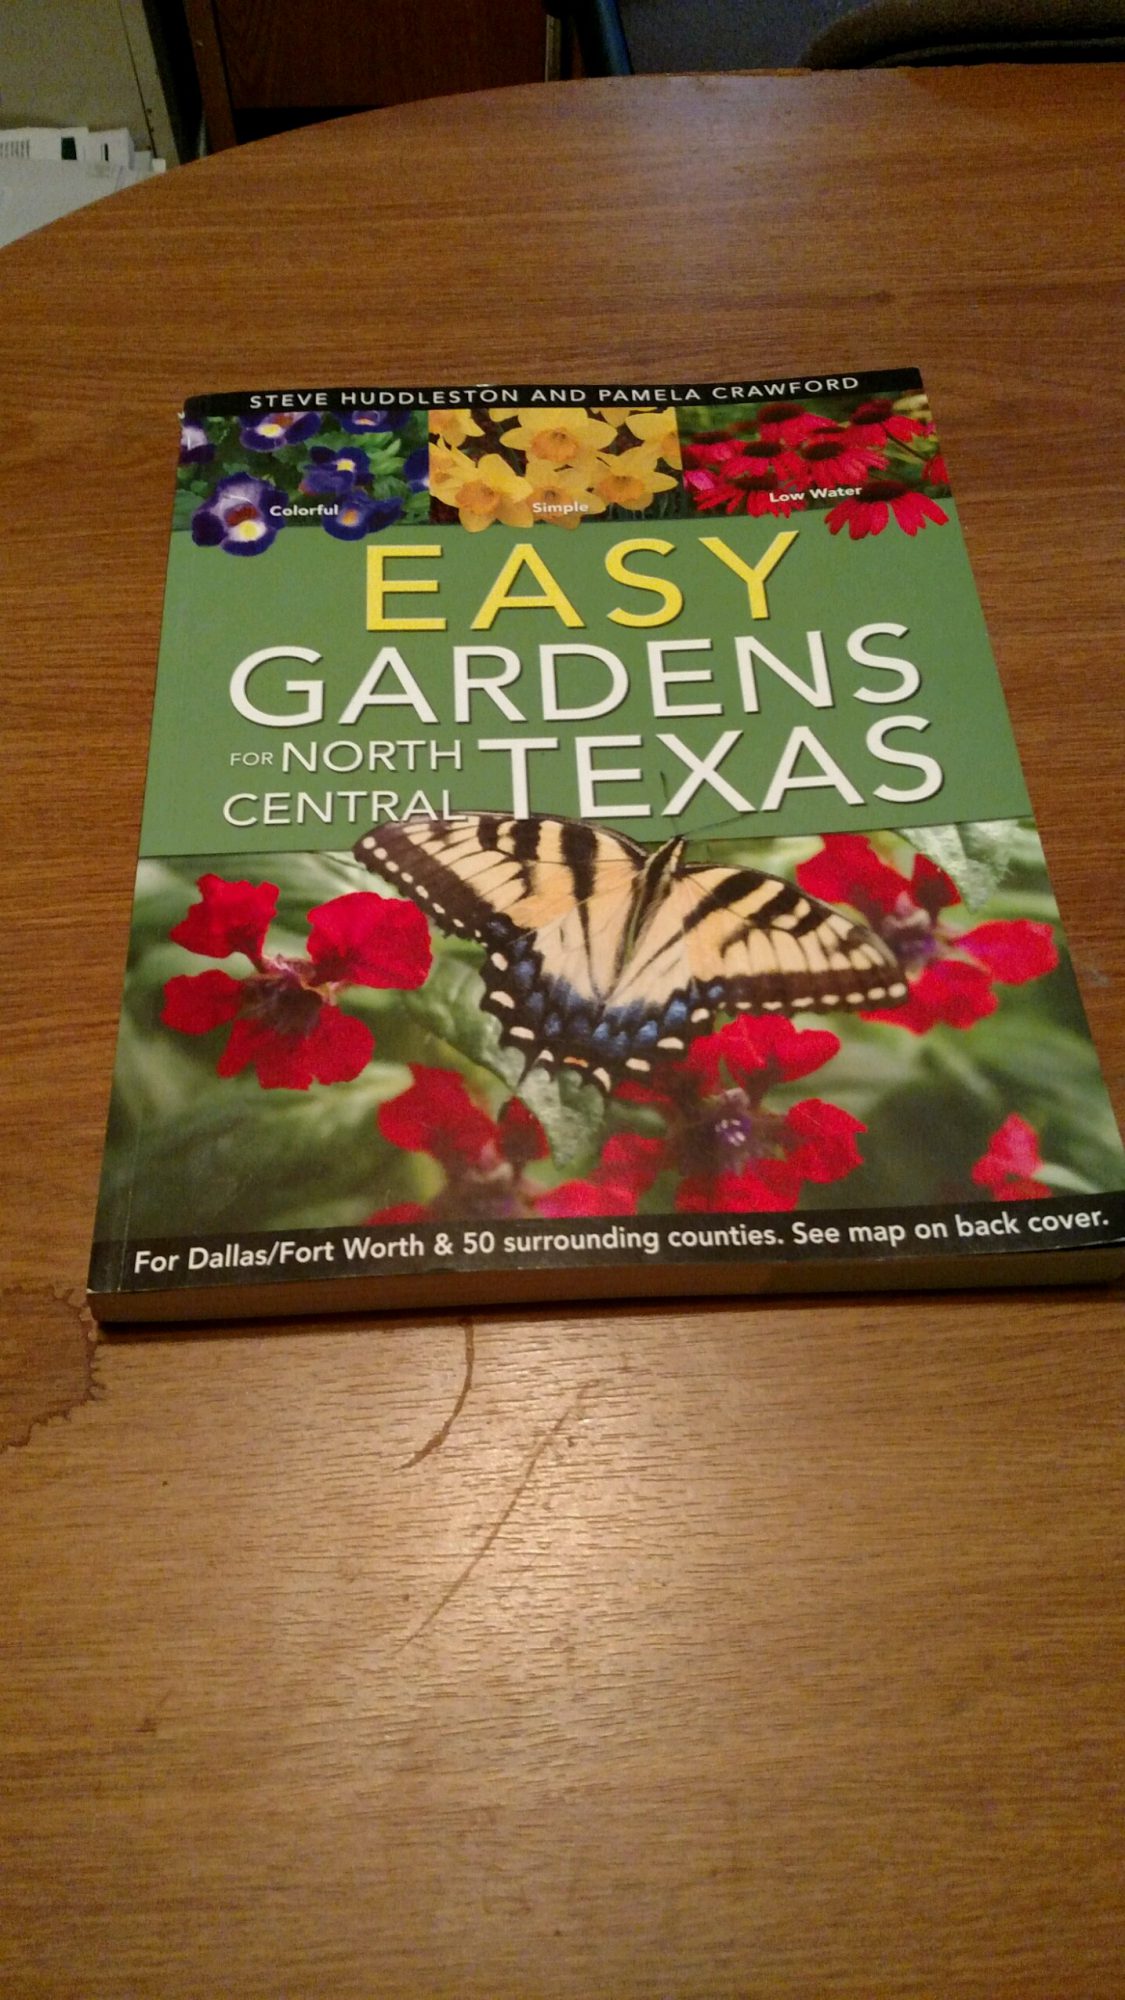 Easy Gardens for North Central Texas